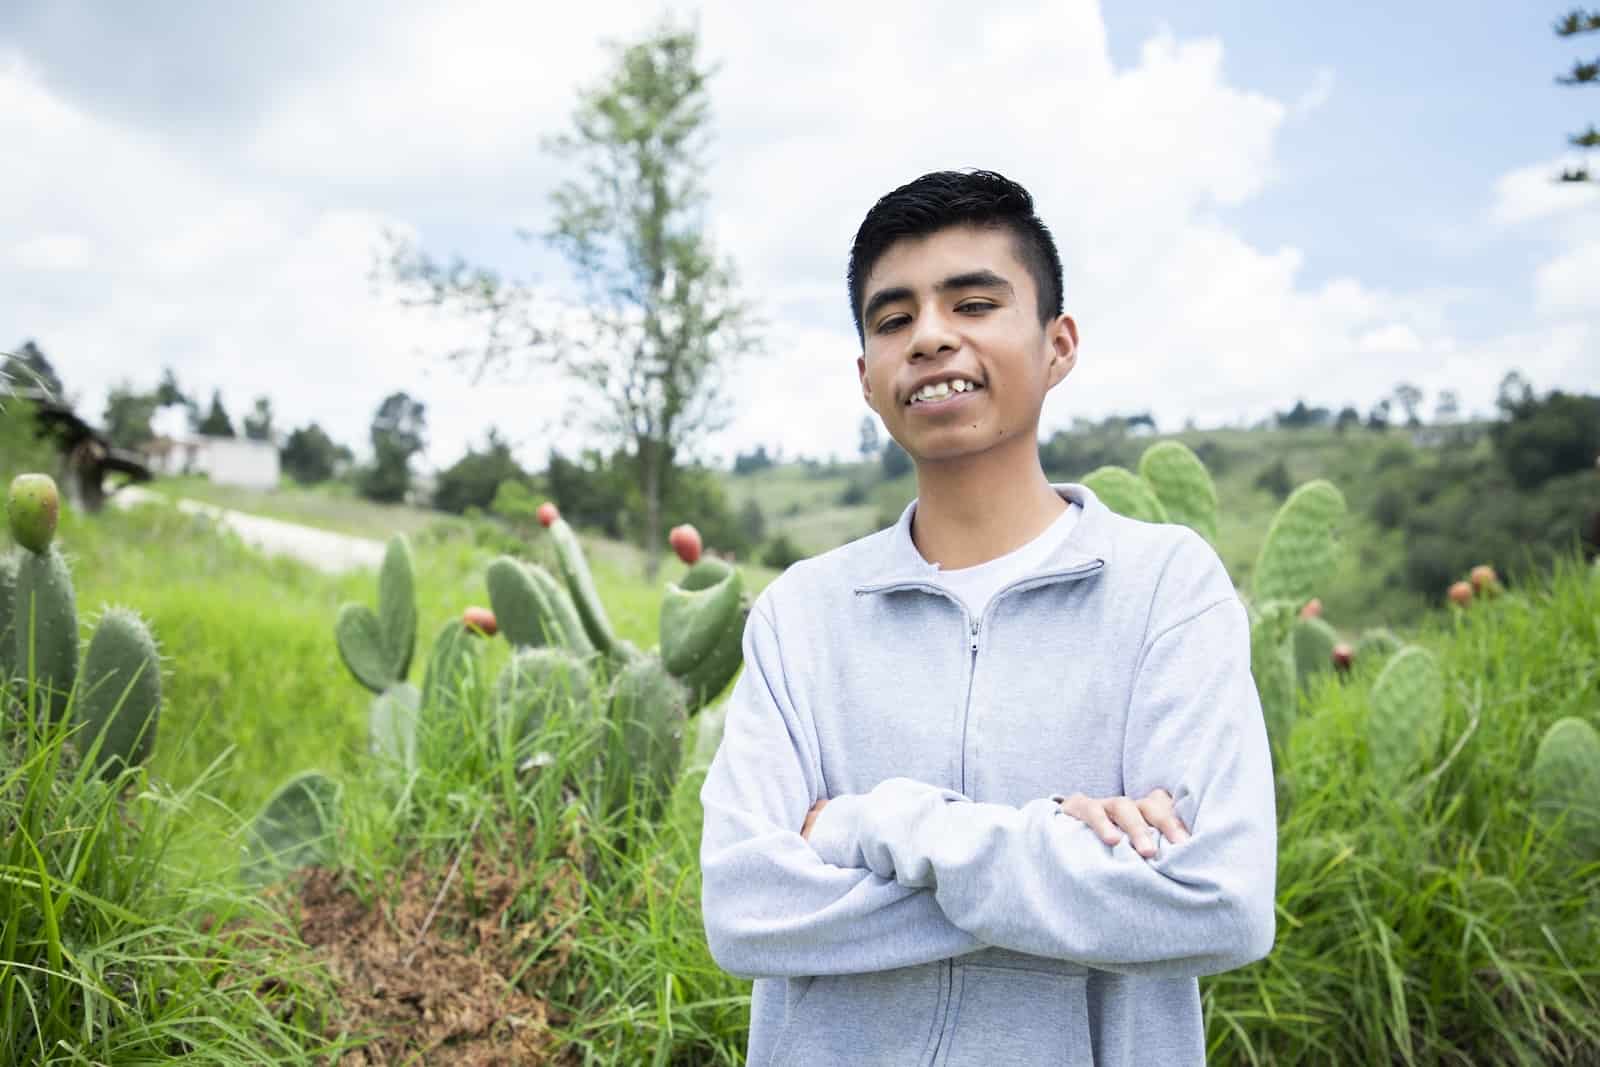 A teenage boy wearing a grey sweater stands with his arms crossed, smiling, in front of a green field with cactus. 